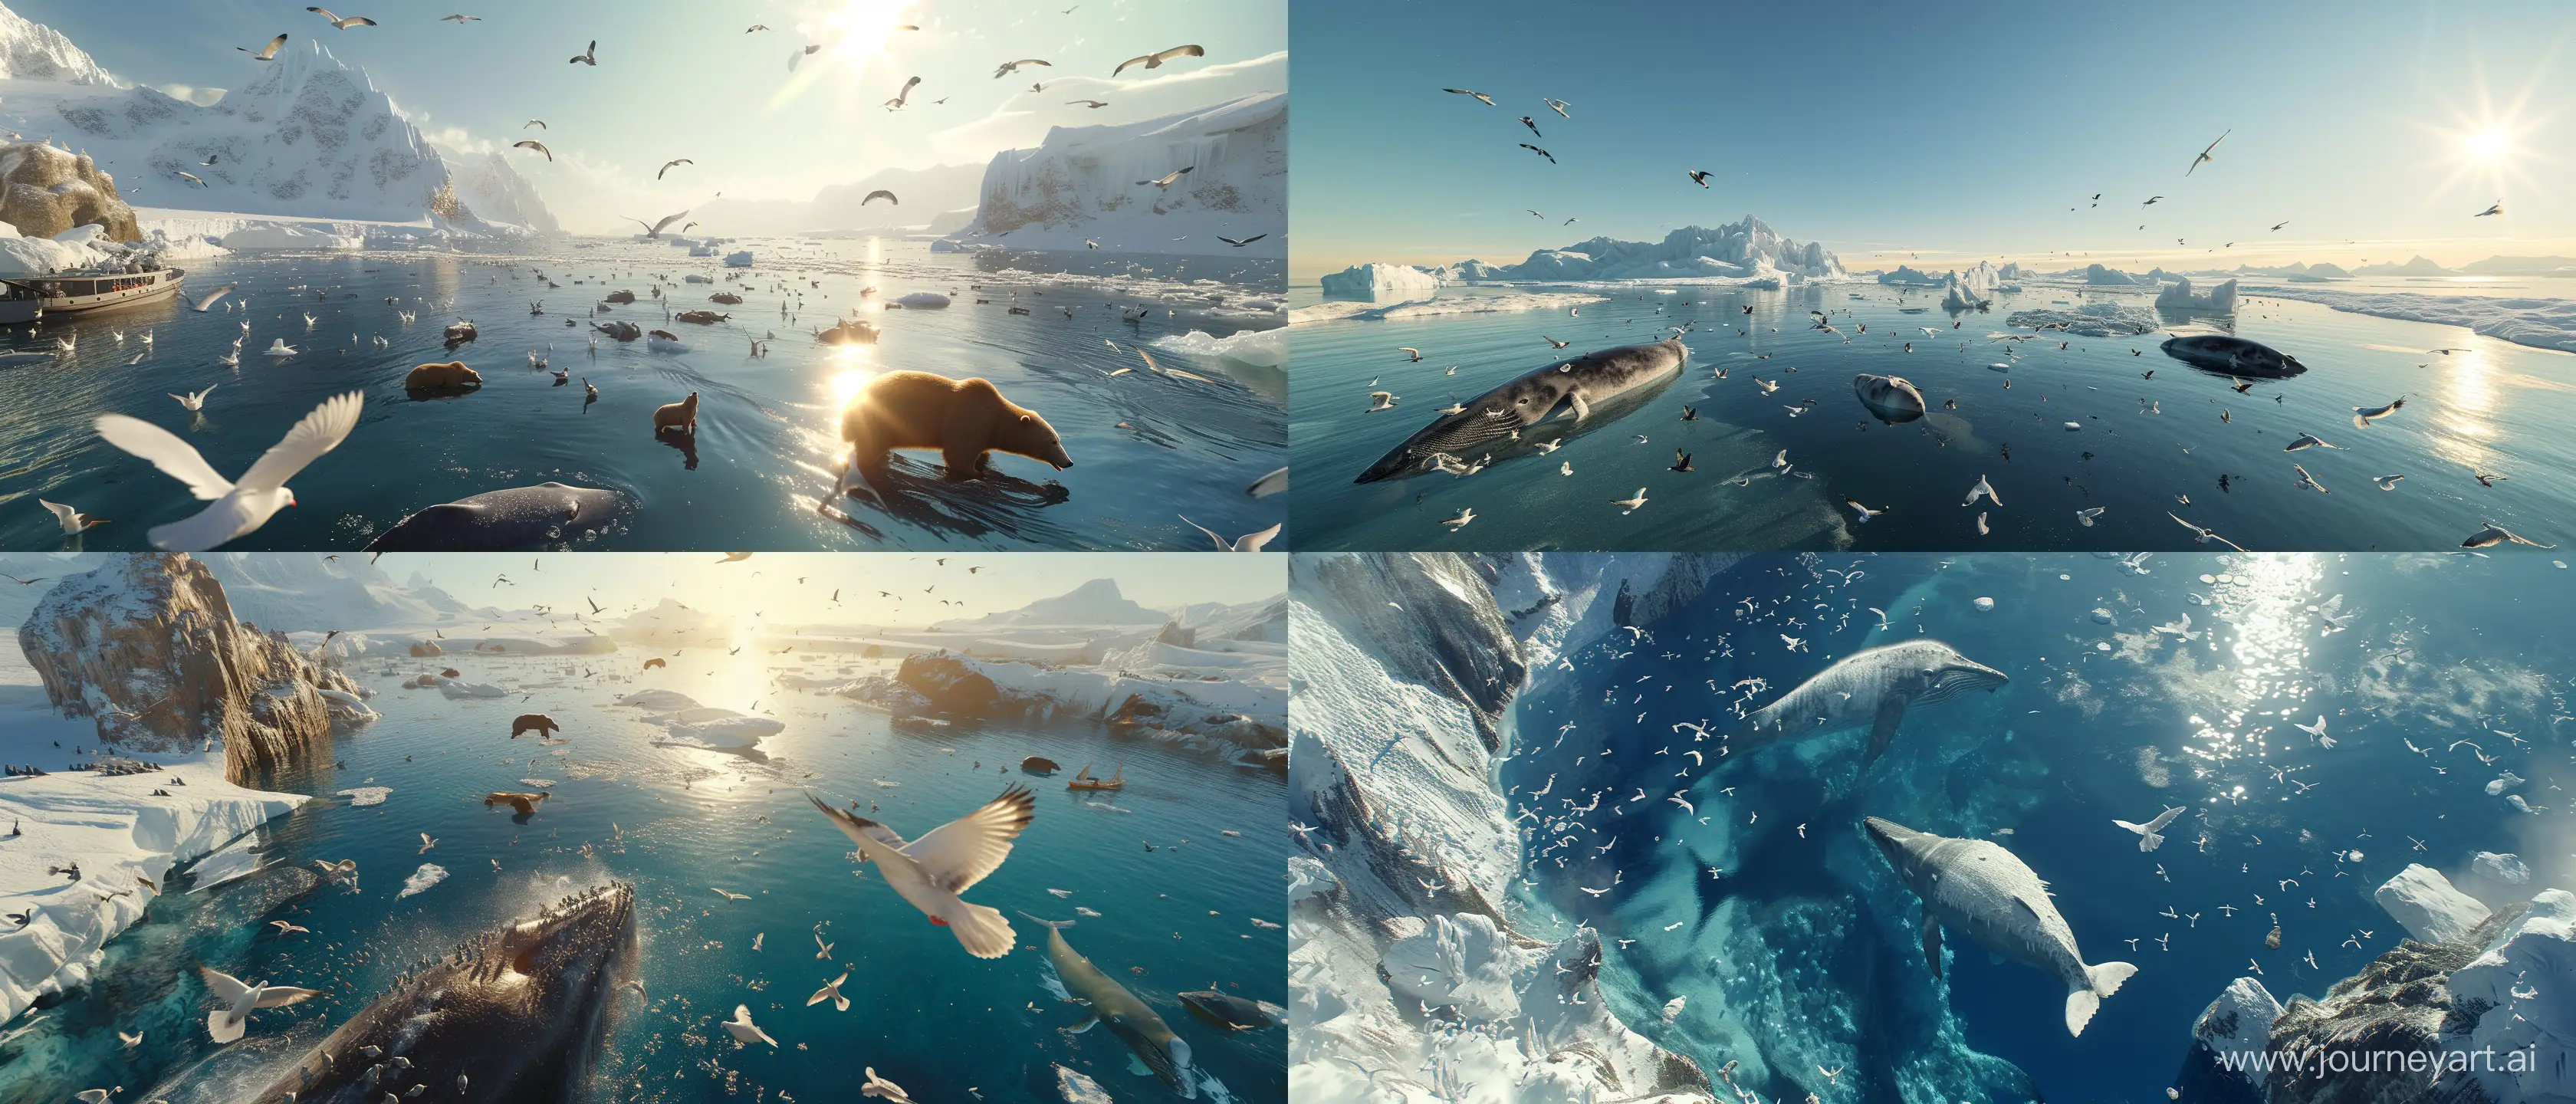 HyperRealistic-Antarctica-Wildlife-Scene-with-Pigeons-Whales-and-Bears